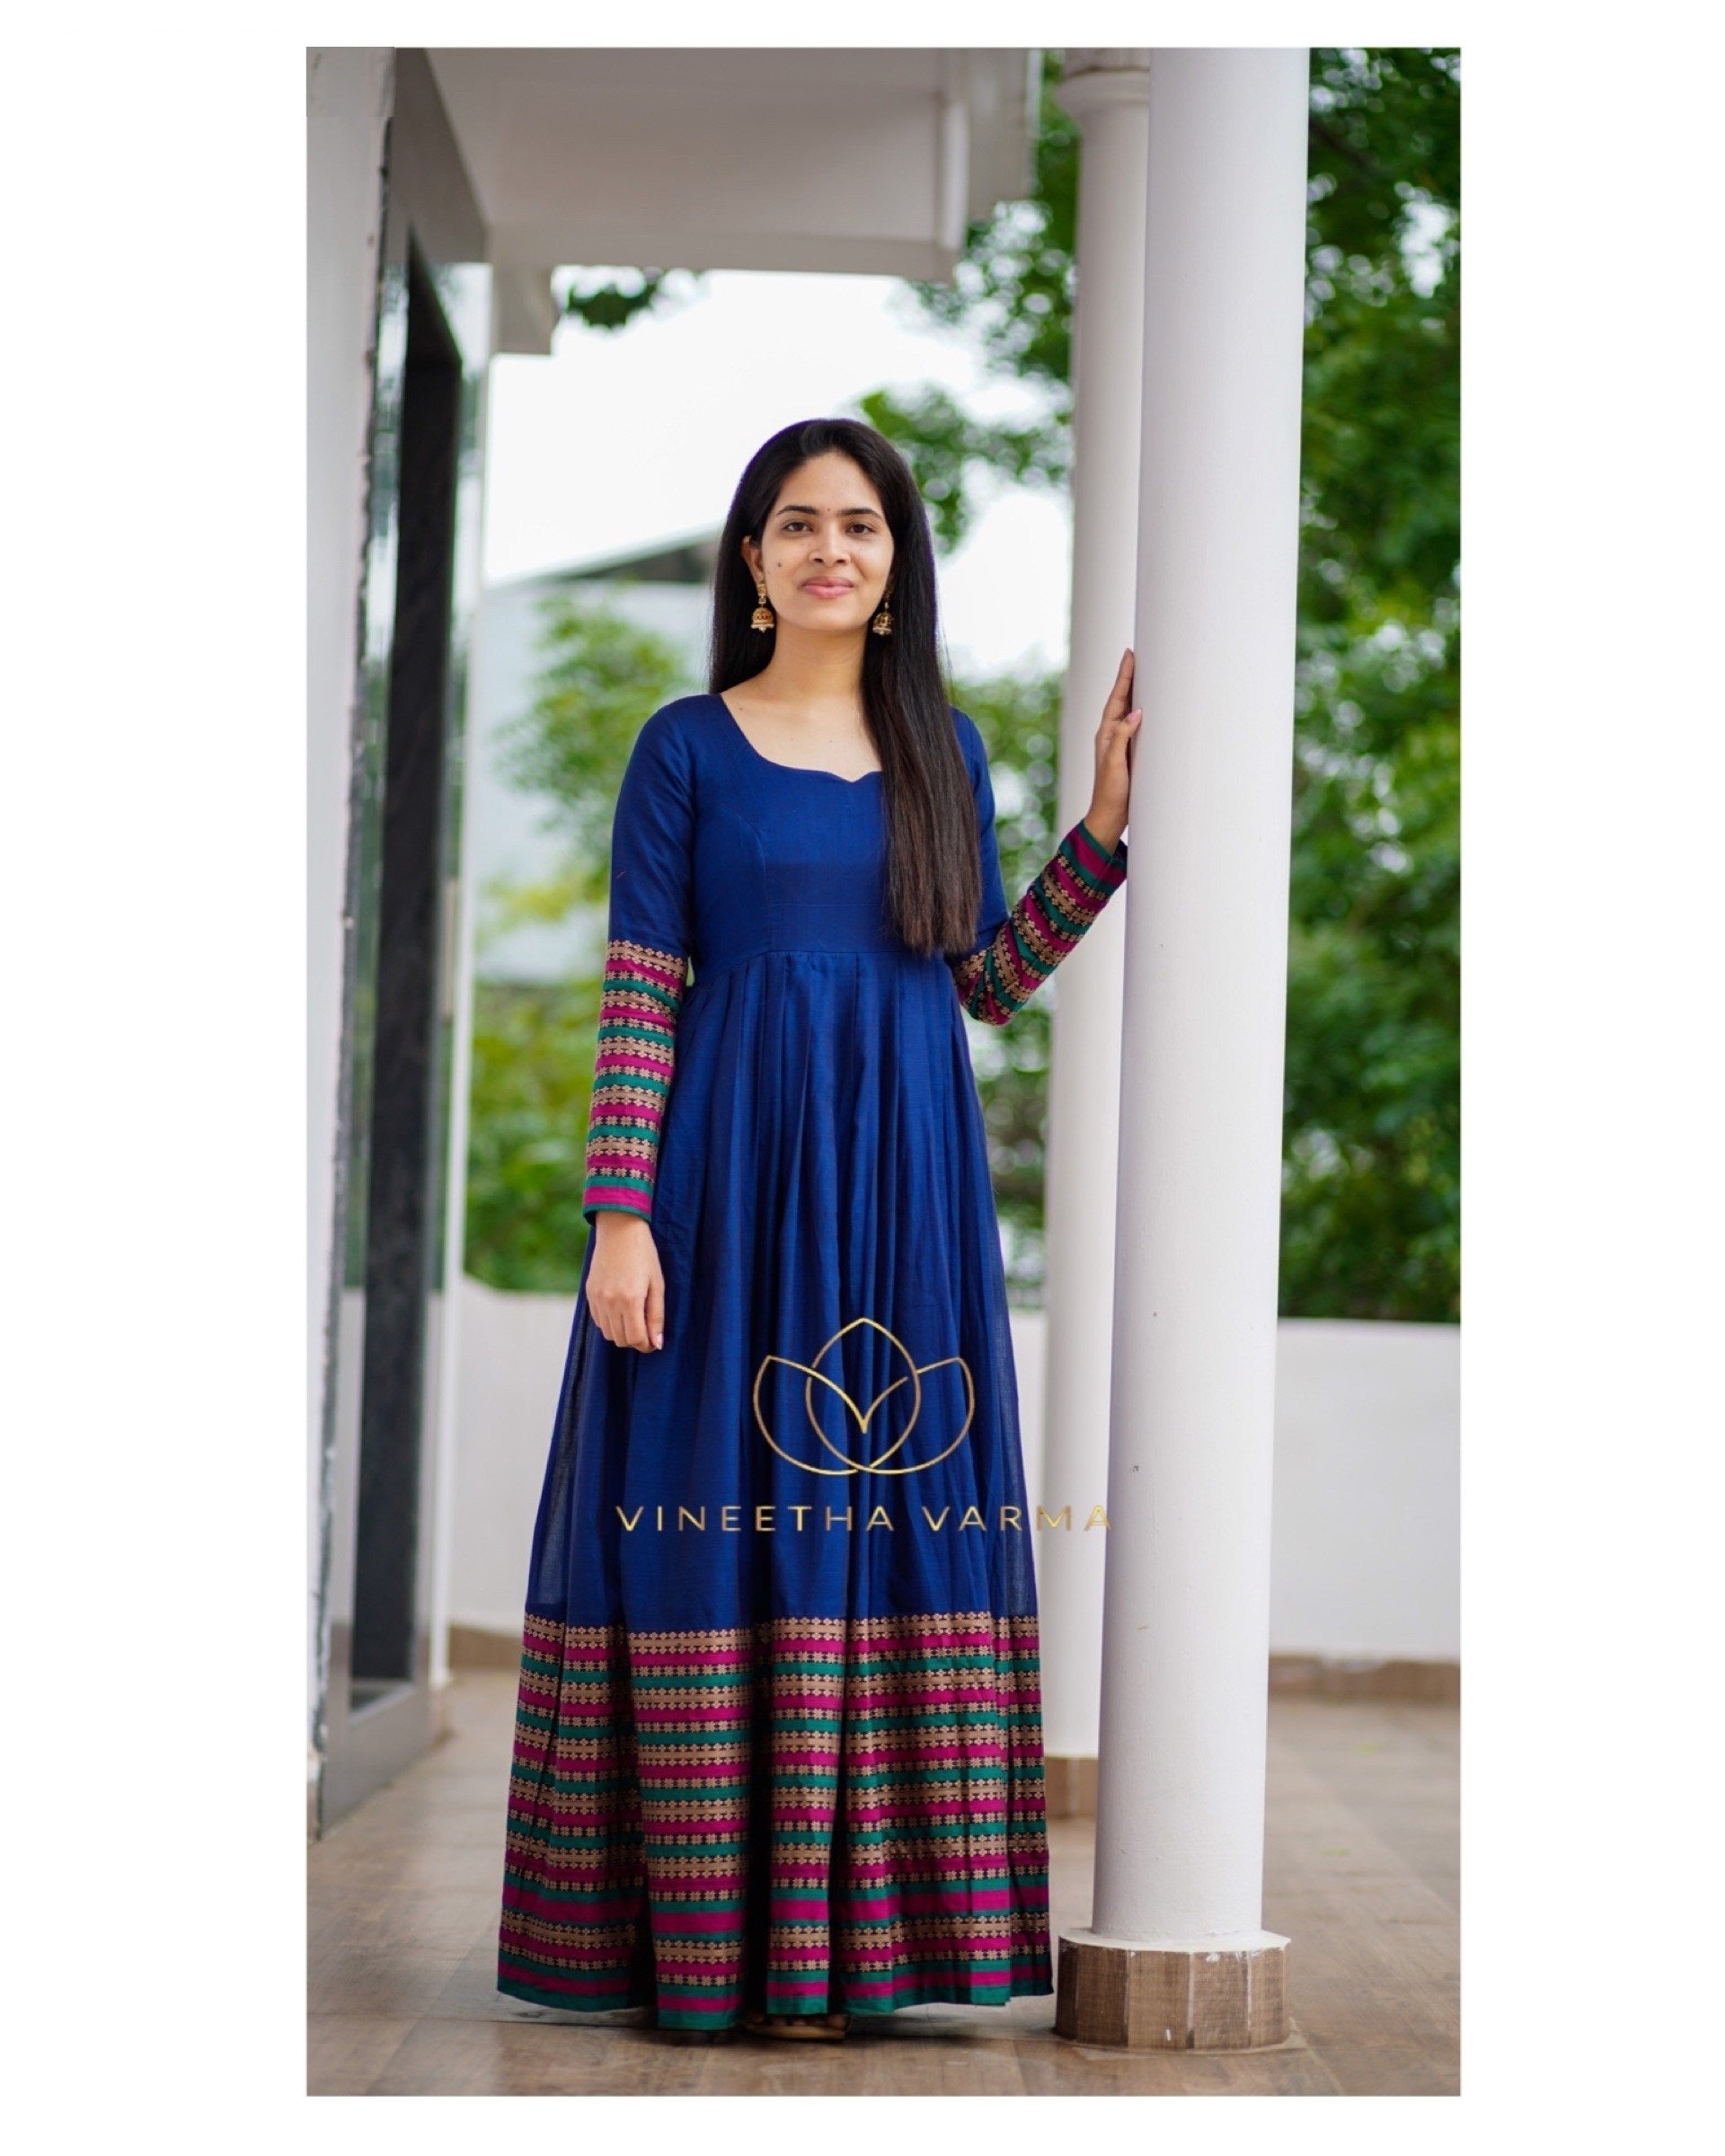 Hatkay - Navy Blue Floral Embroidered Layered Indo Western Gown - Shop This  Outfit For $190.00 USD At Hatkay.com 🌟 Search for Product Code :- TH-05  #hatkay @hatkay11 | Facebook